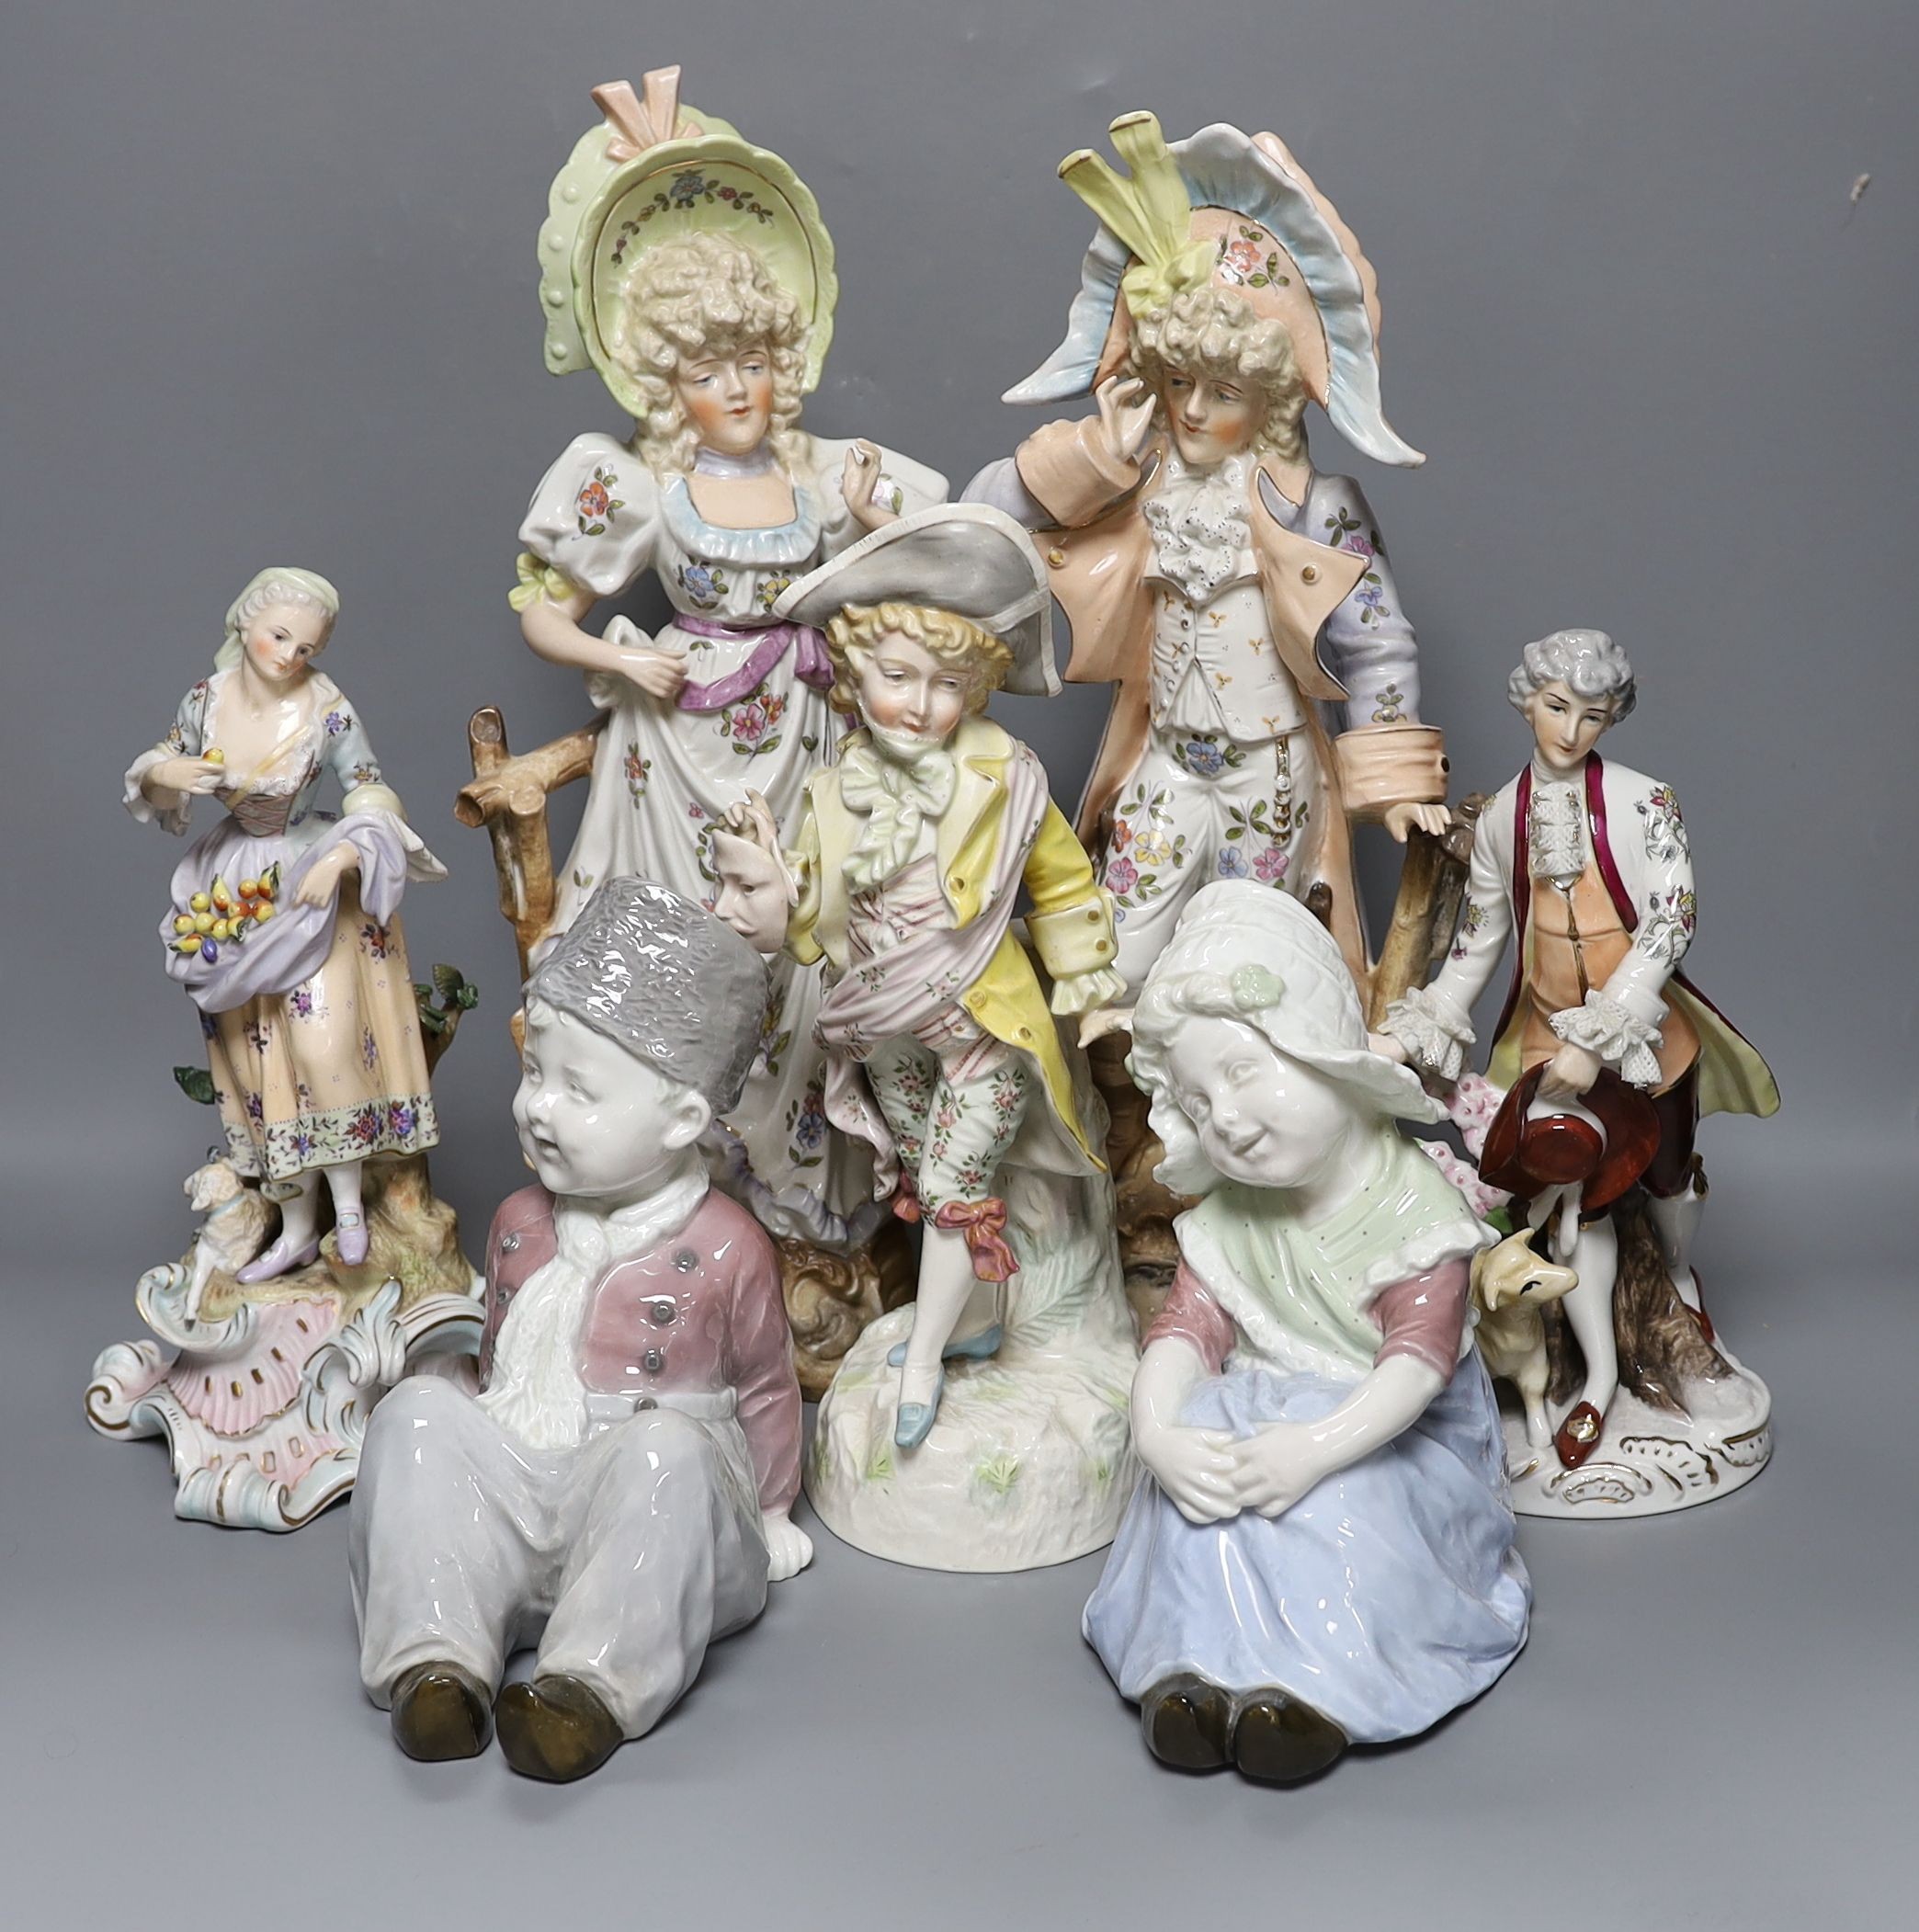 A collection of German and French porcelain figurines, tallest 39.5cm high